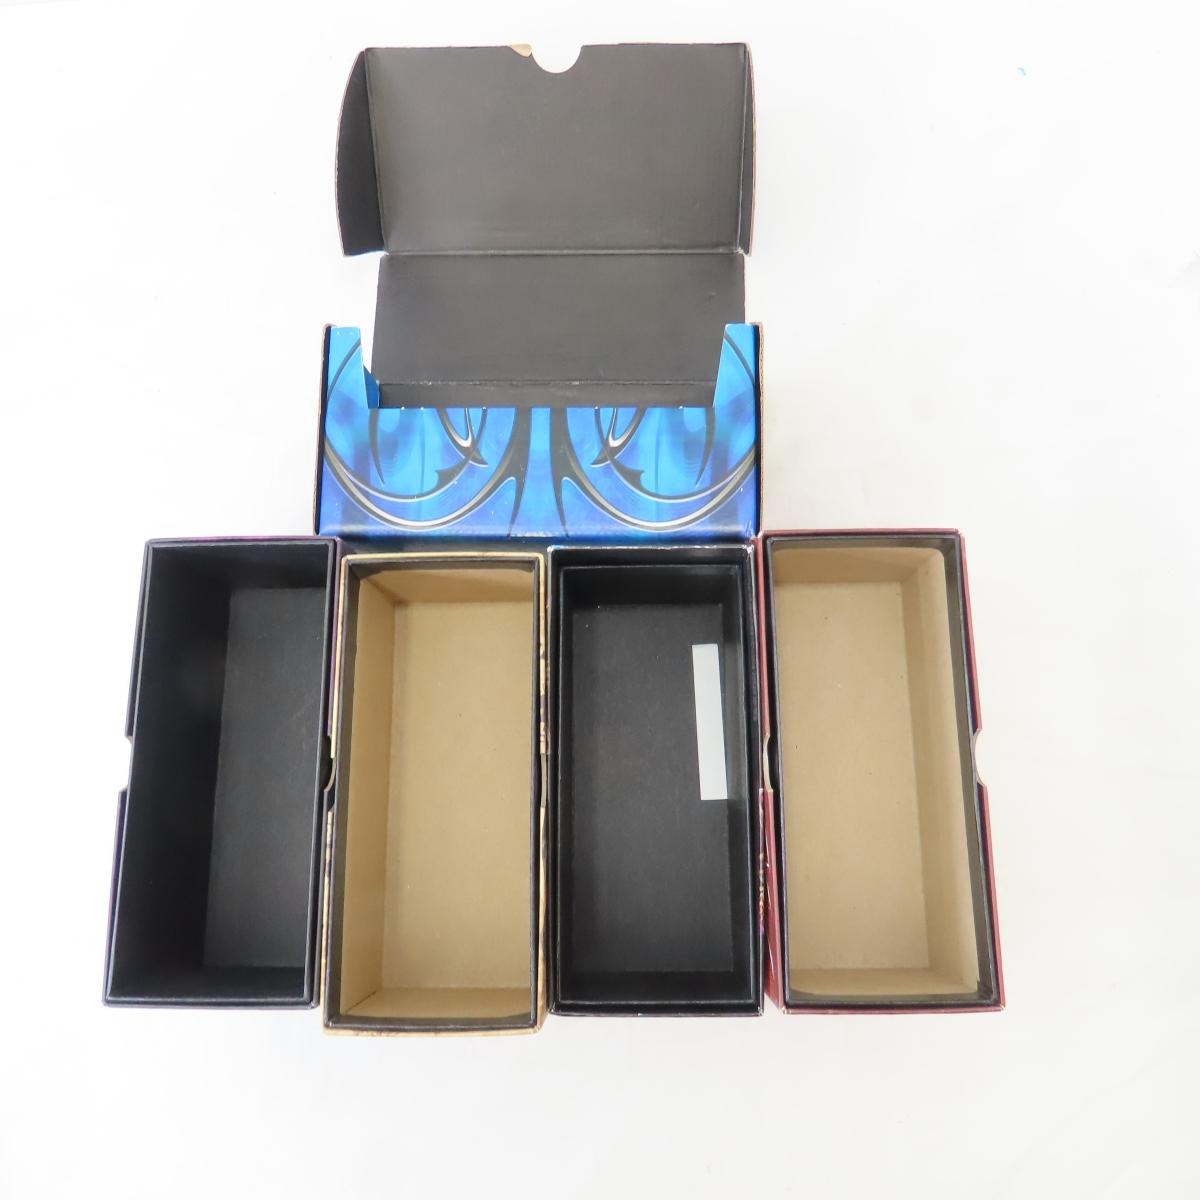 Magic the Gathering Card Boxes & Accessories